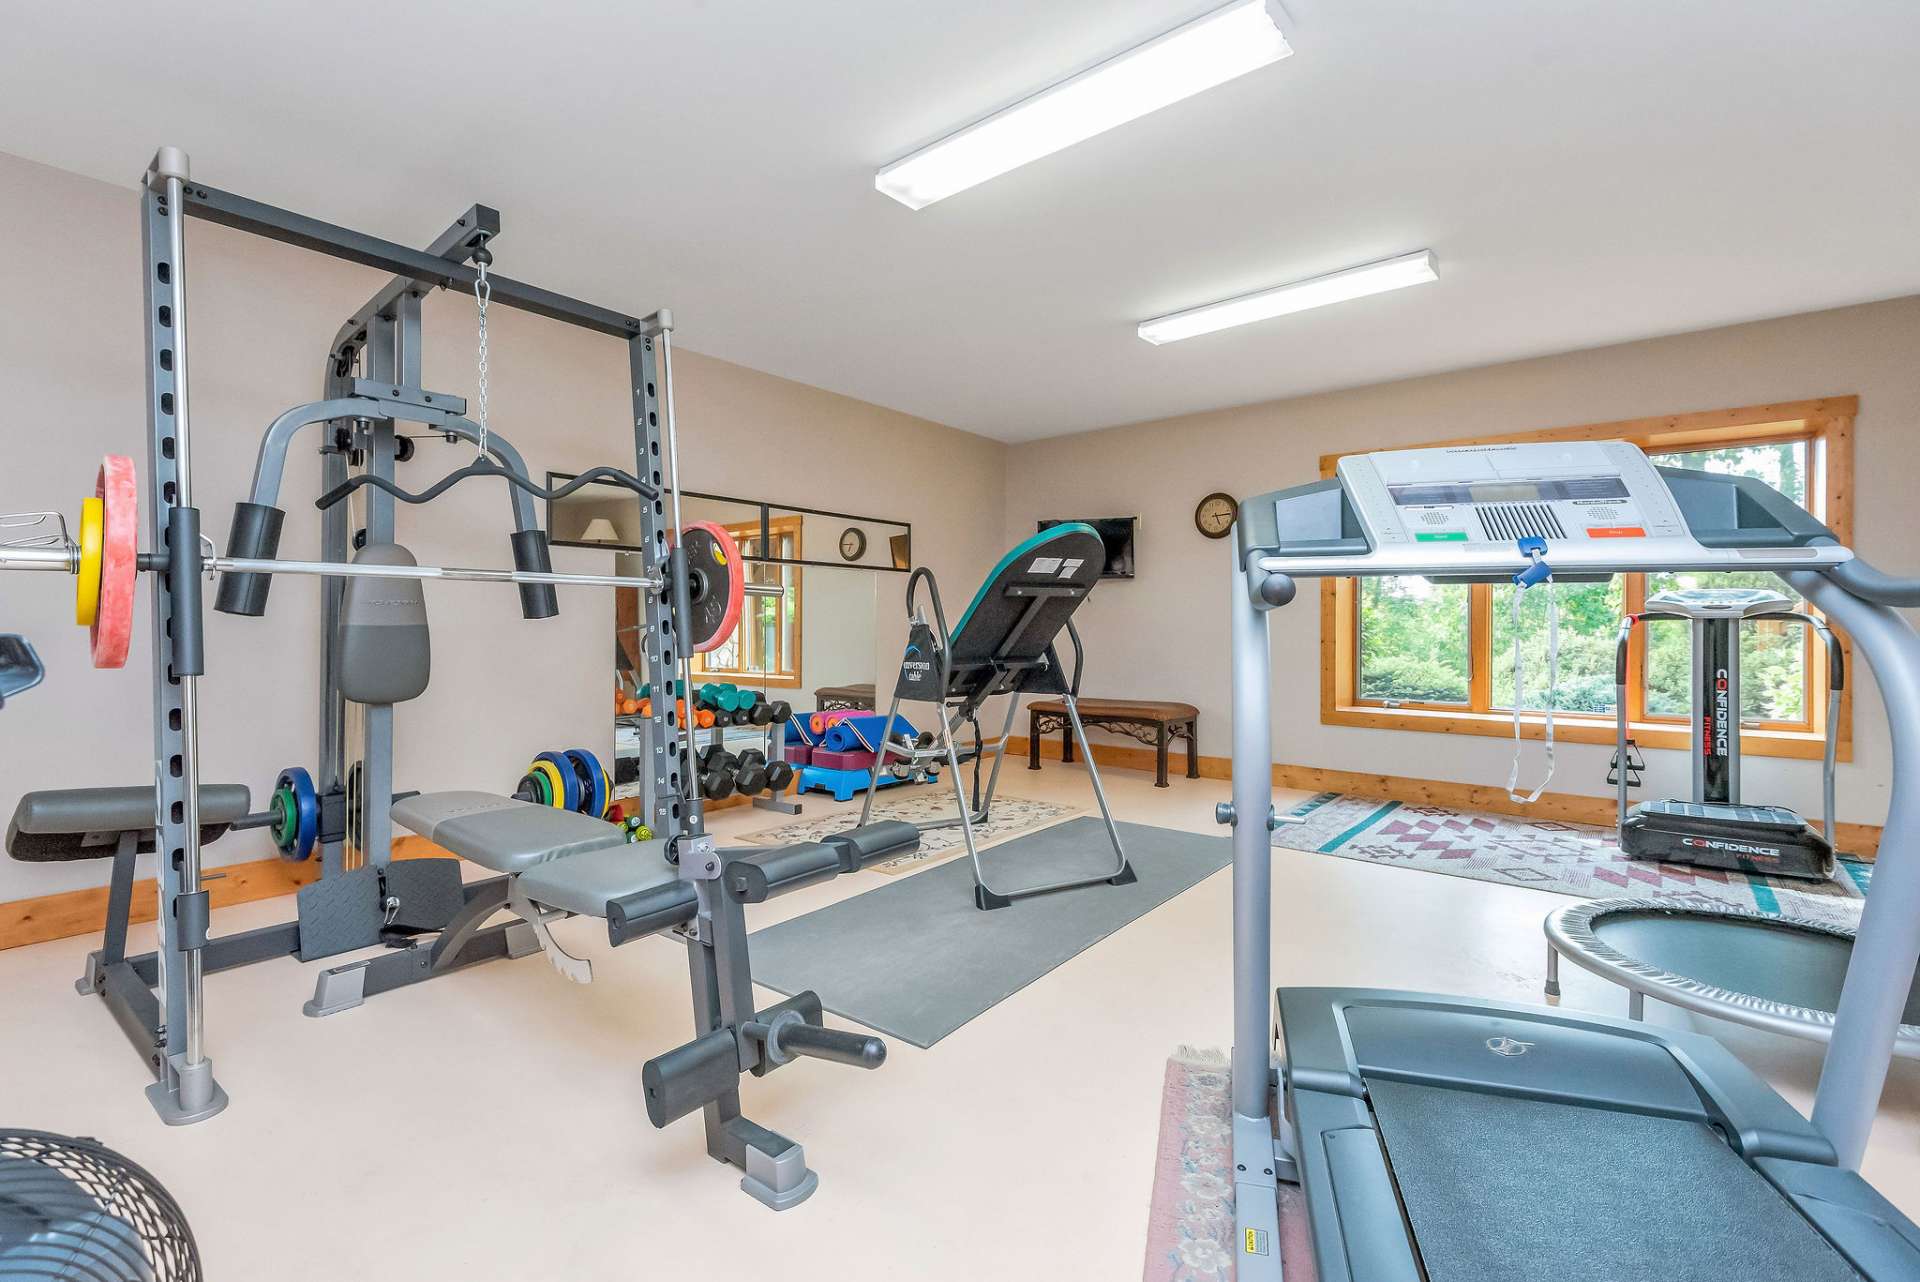 The fitness area is not heated and not counted in the heated living square footage.